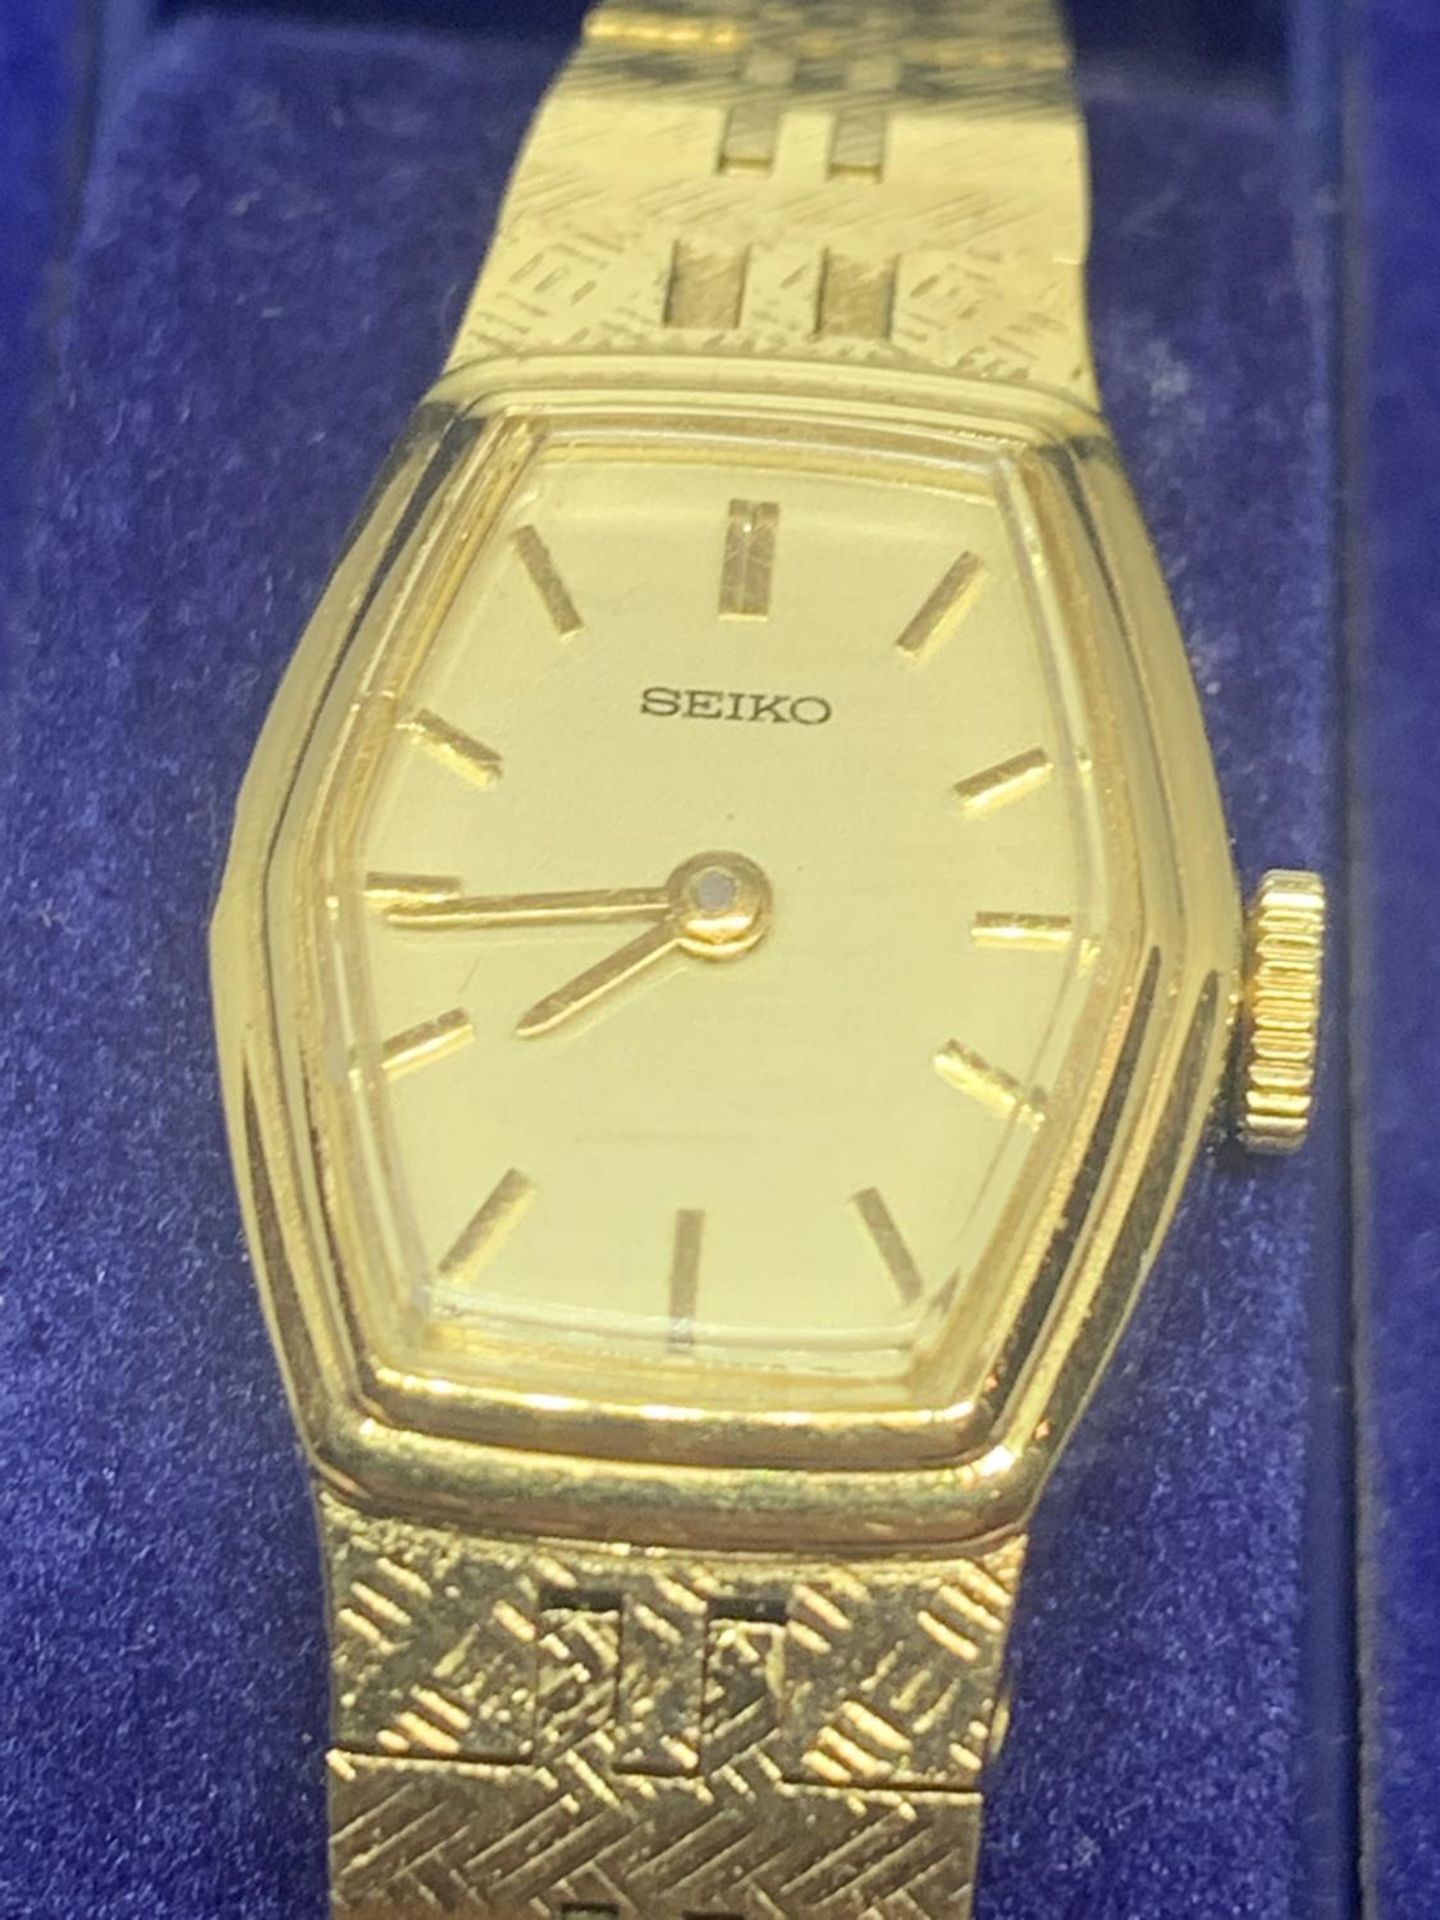 A LADIES SEIKO WRISTWATCH WITH A PRESENTATION BOX, SEEN WORKING BUT NO WARRANTY - Image 2 of 4